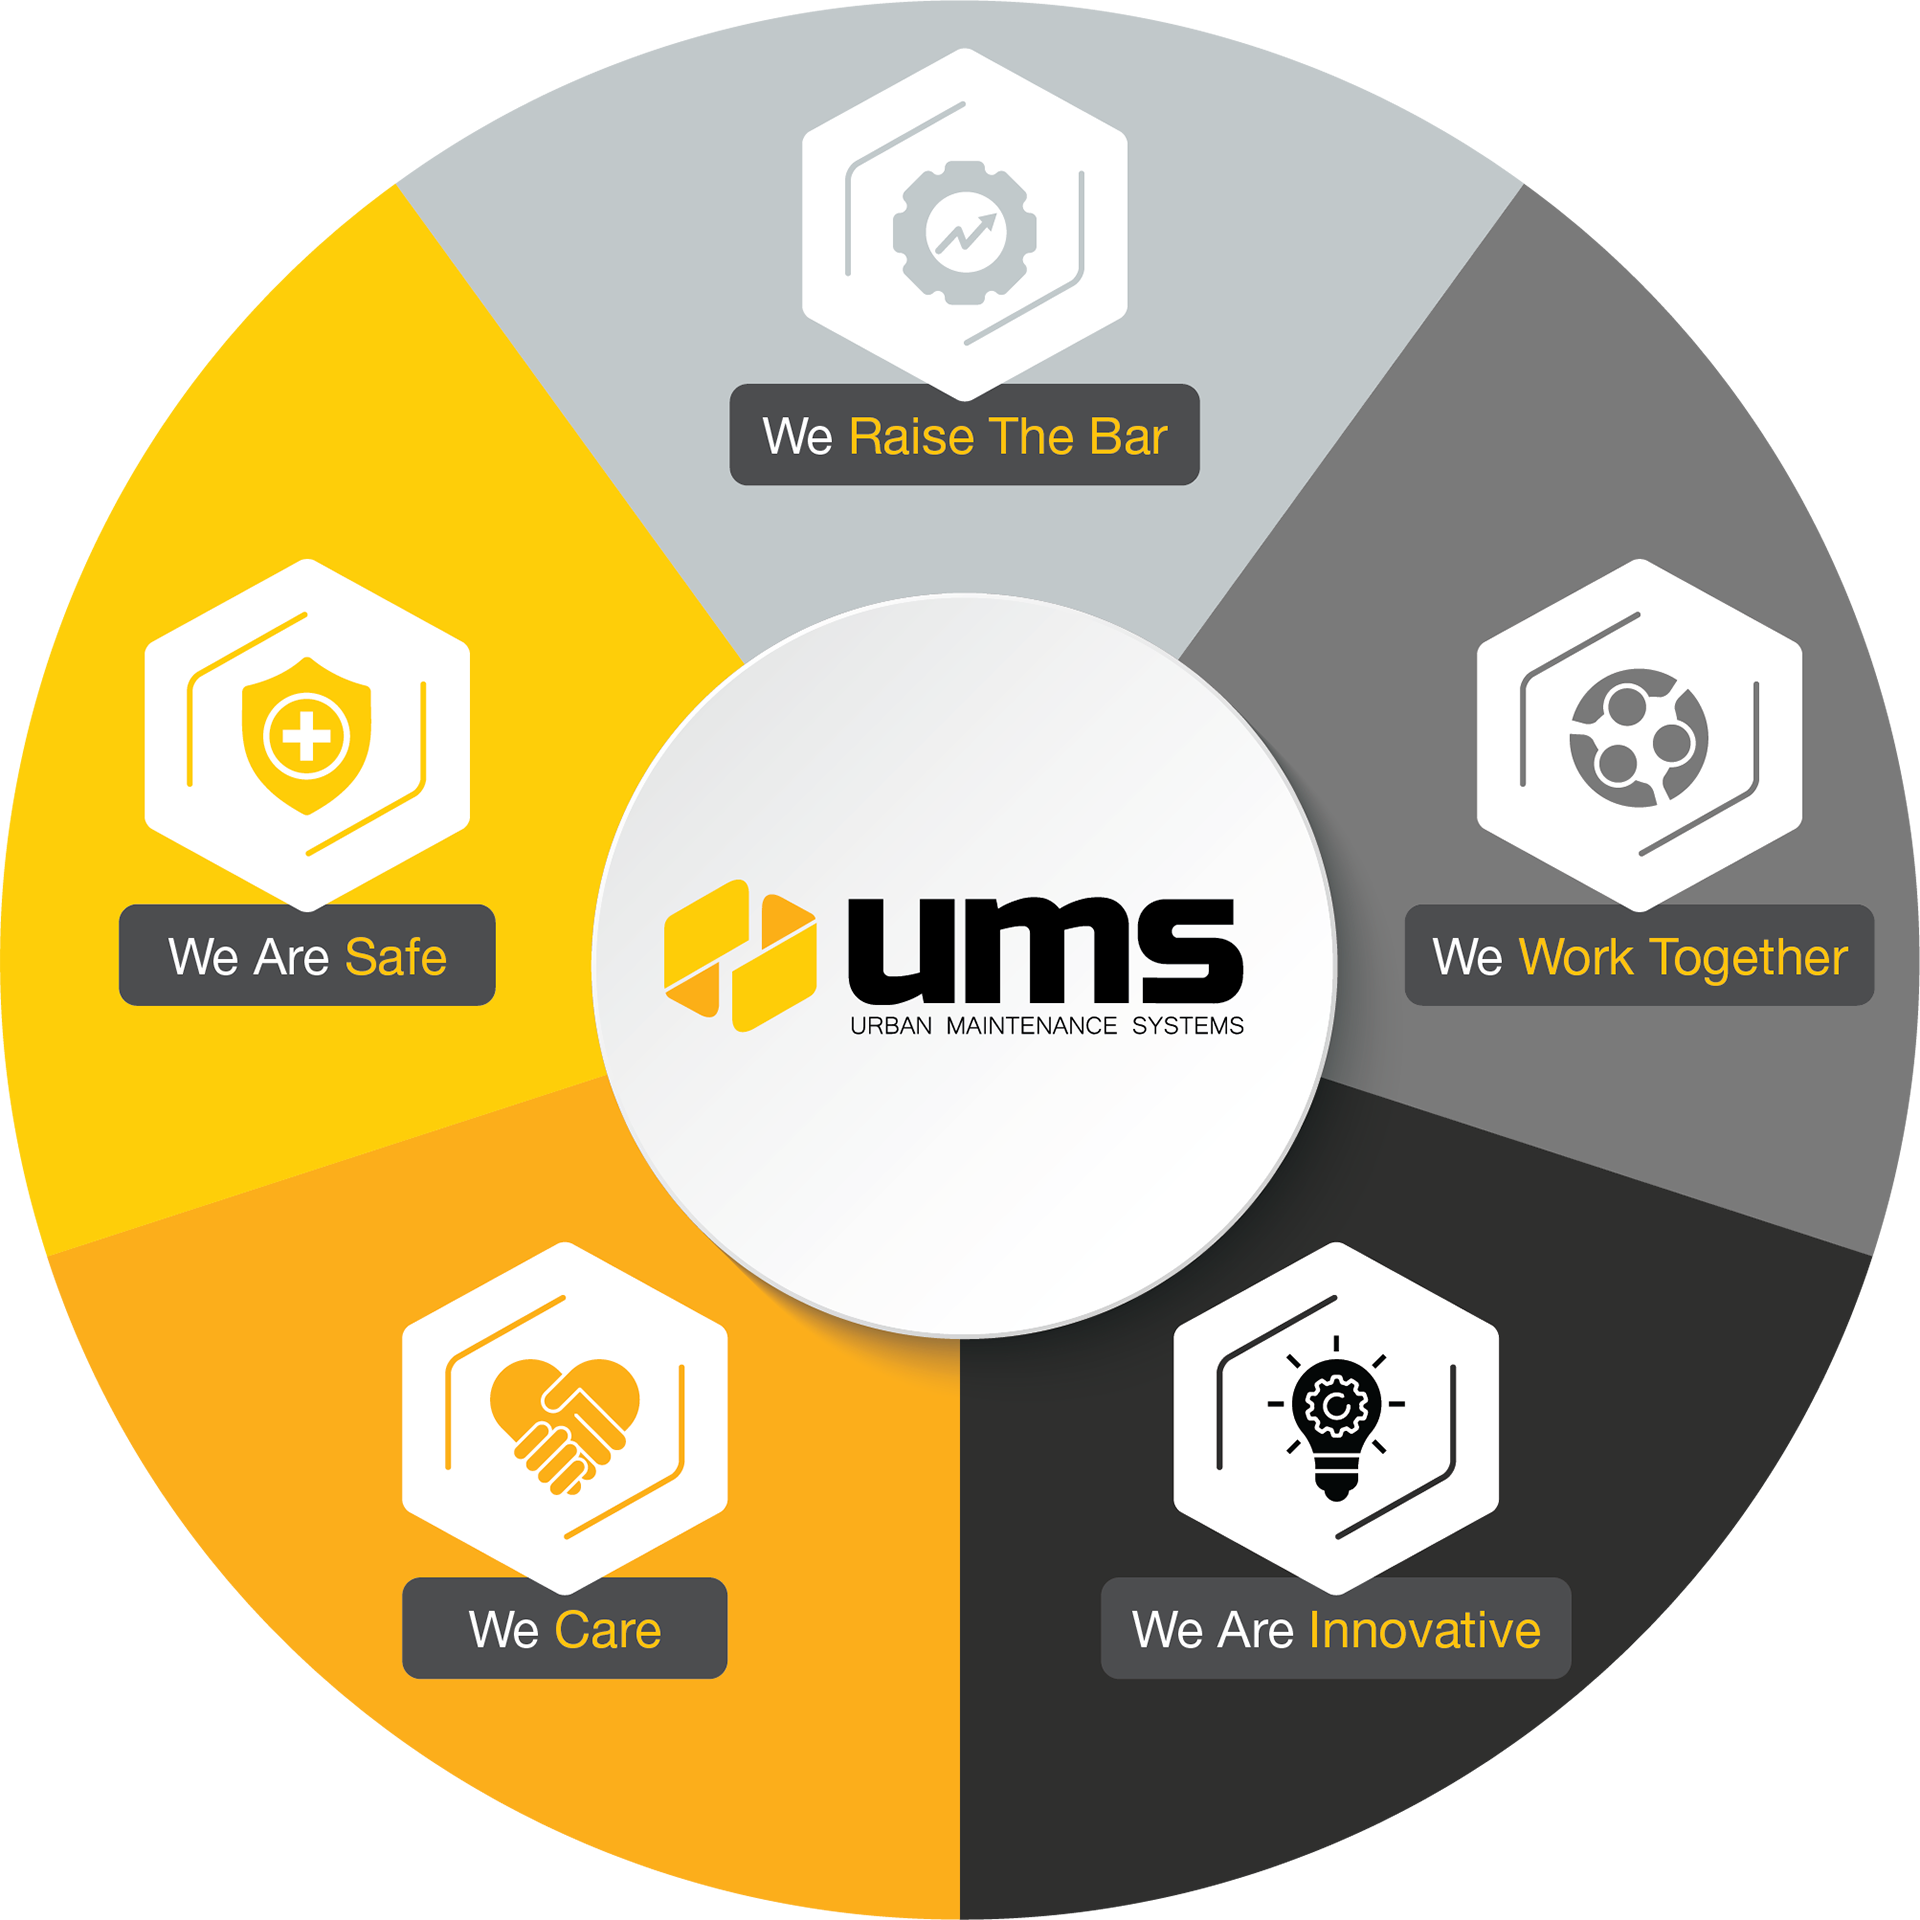 About UMS. UMS Values